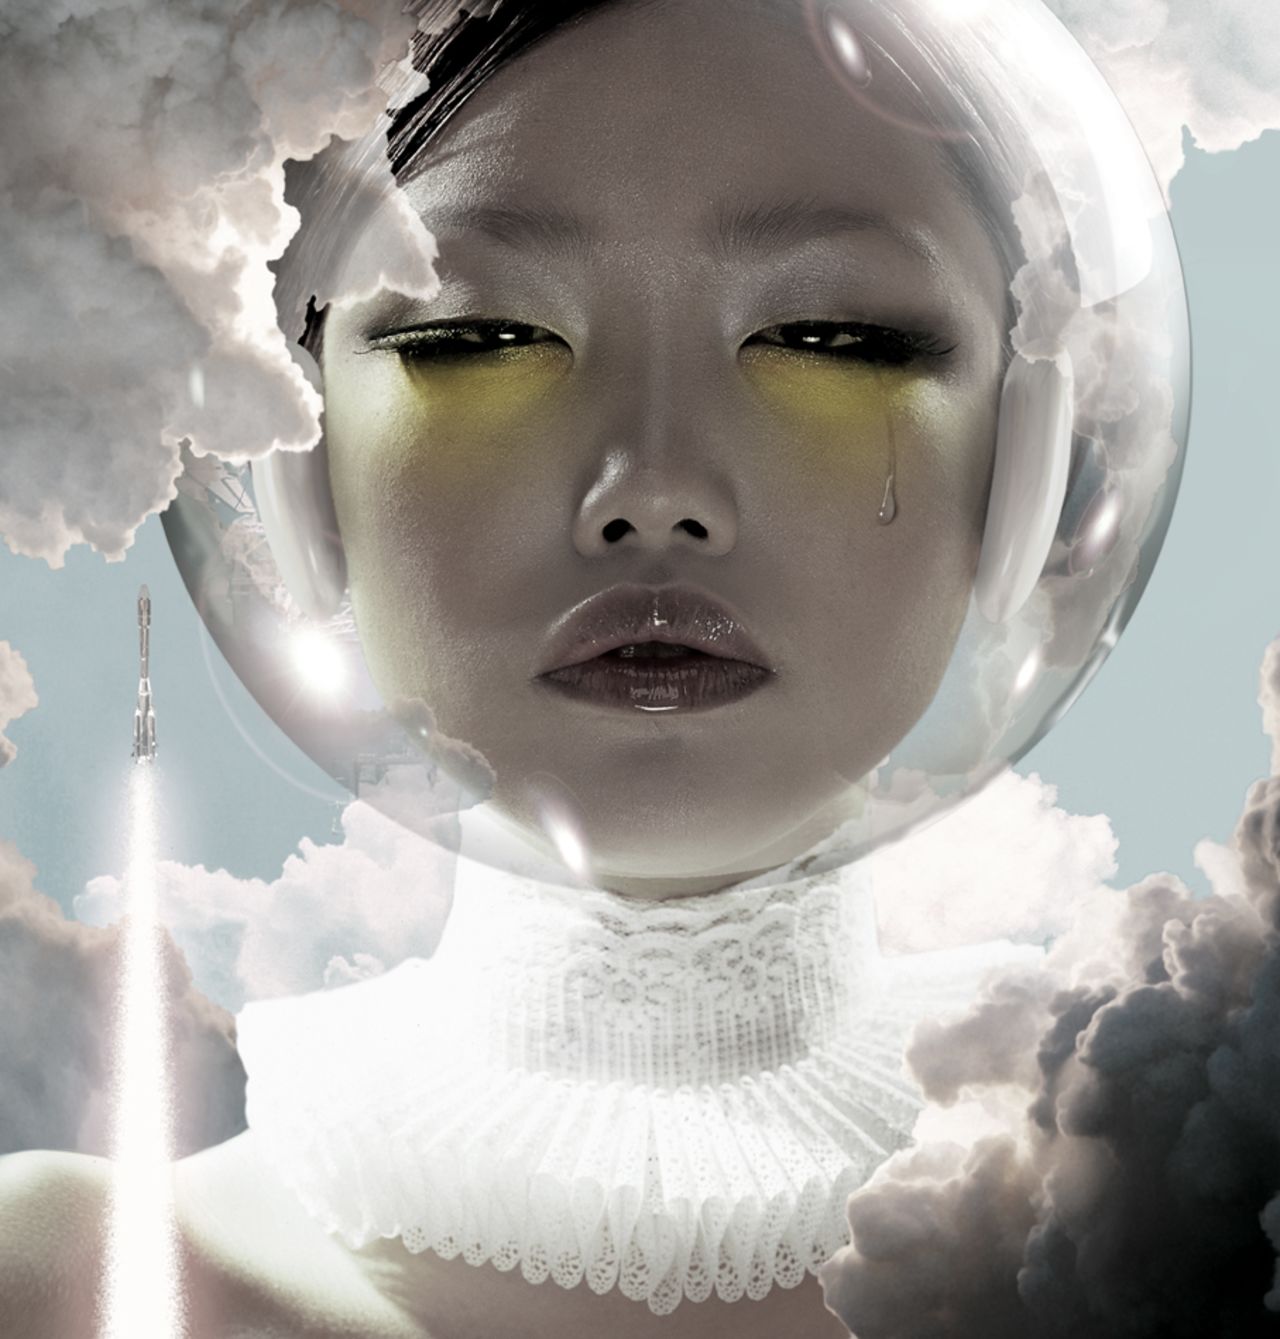 This portrait, "Astronaut" was shot by Chen Man in 2003, for Vision magazine. It is now part of a collection at the V&A museum in the UK. 